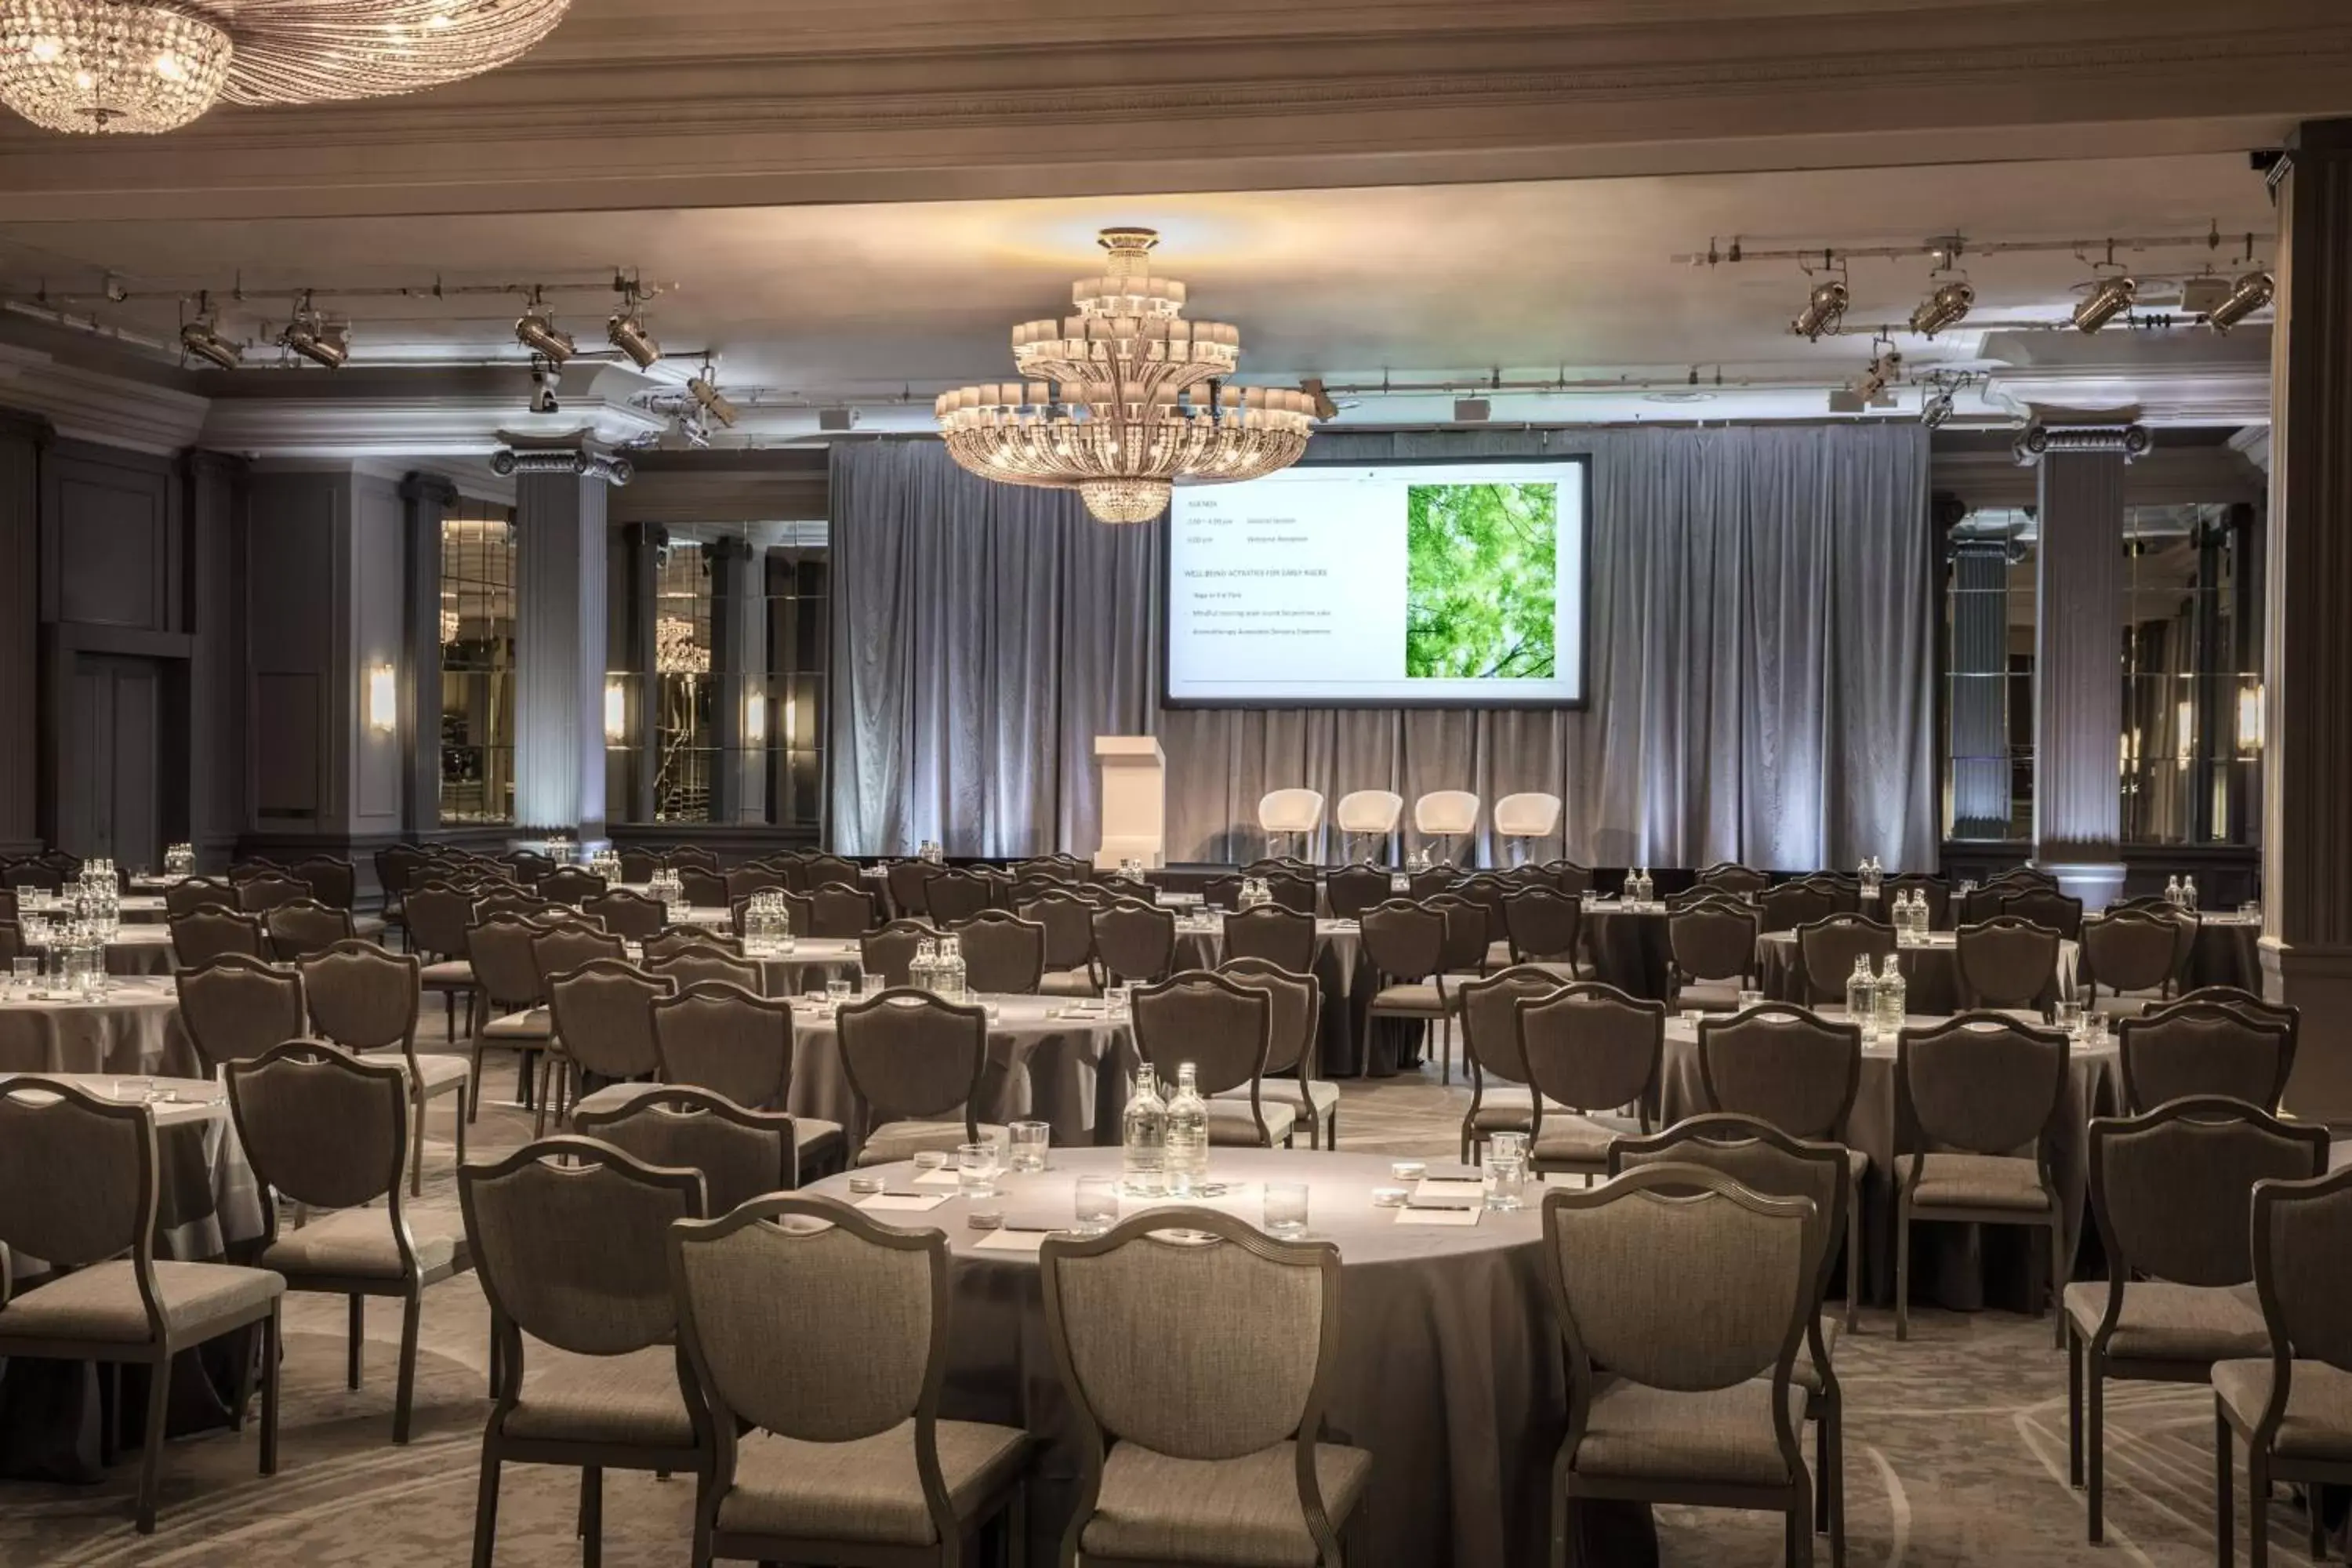 Meeting/conference room, Banquet Facilities in JW Marriott Grosvenor House London